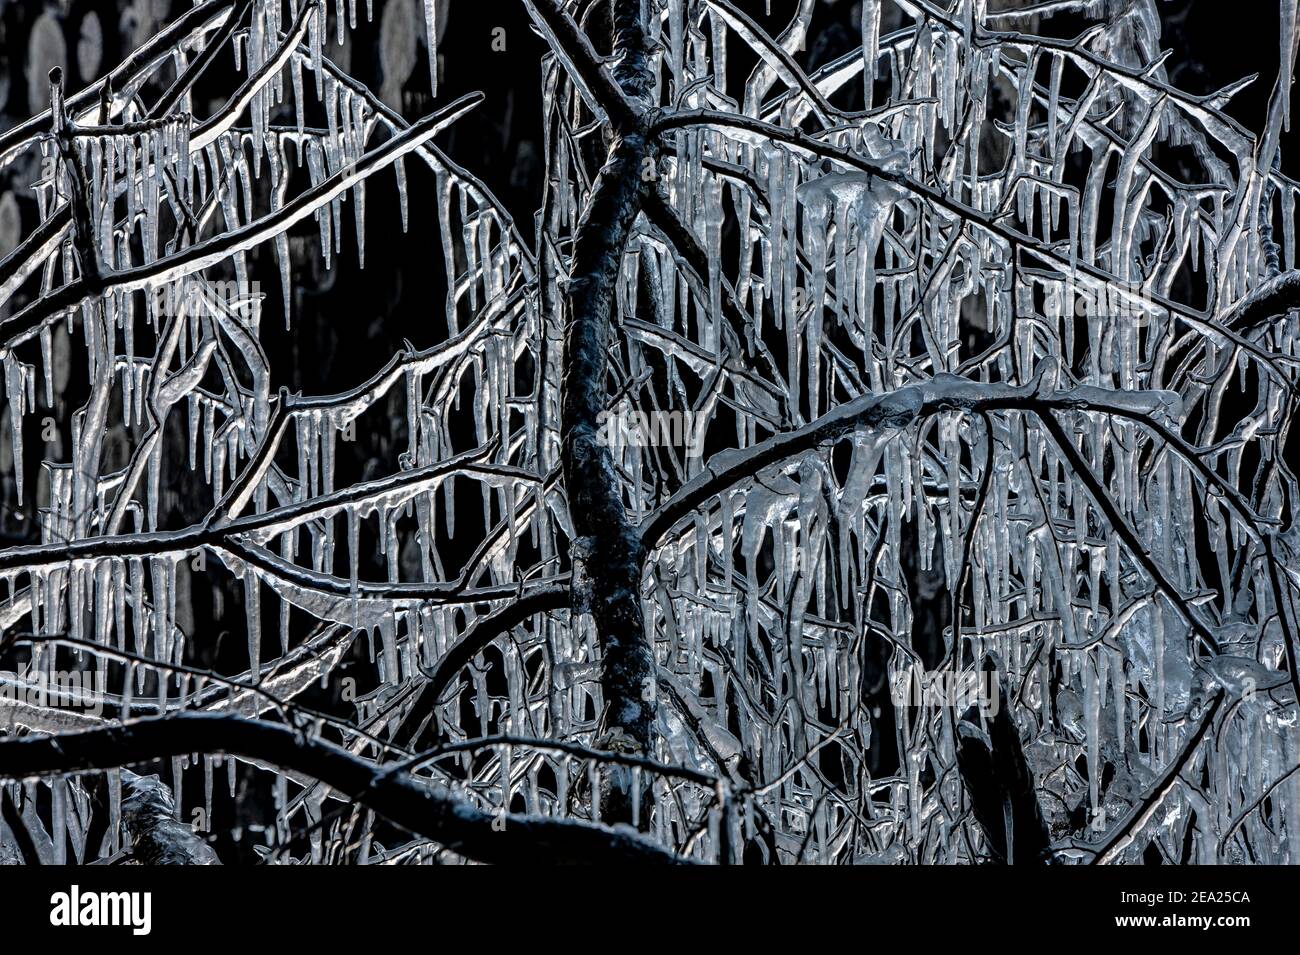 Branches enclosed by ice with icicles after an icy rain, Schemmerhofen, Biberach an der Riss, Baden-Wuerttemberg, Germany Stock Photo